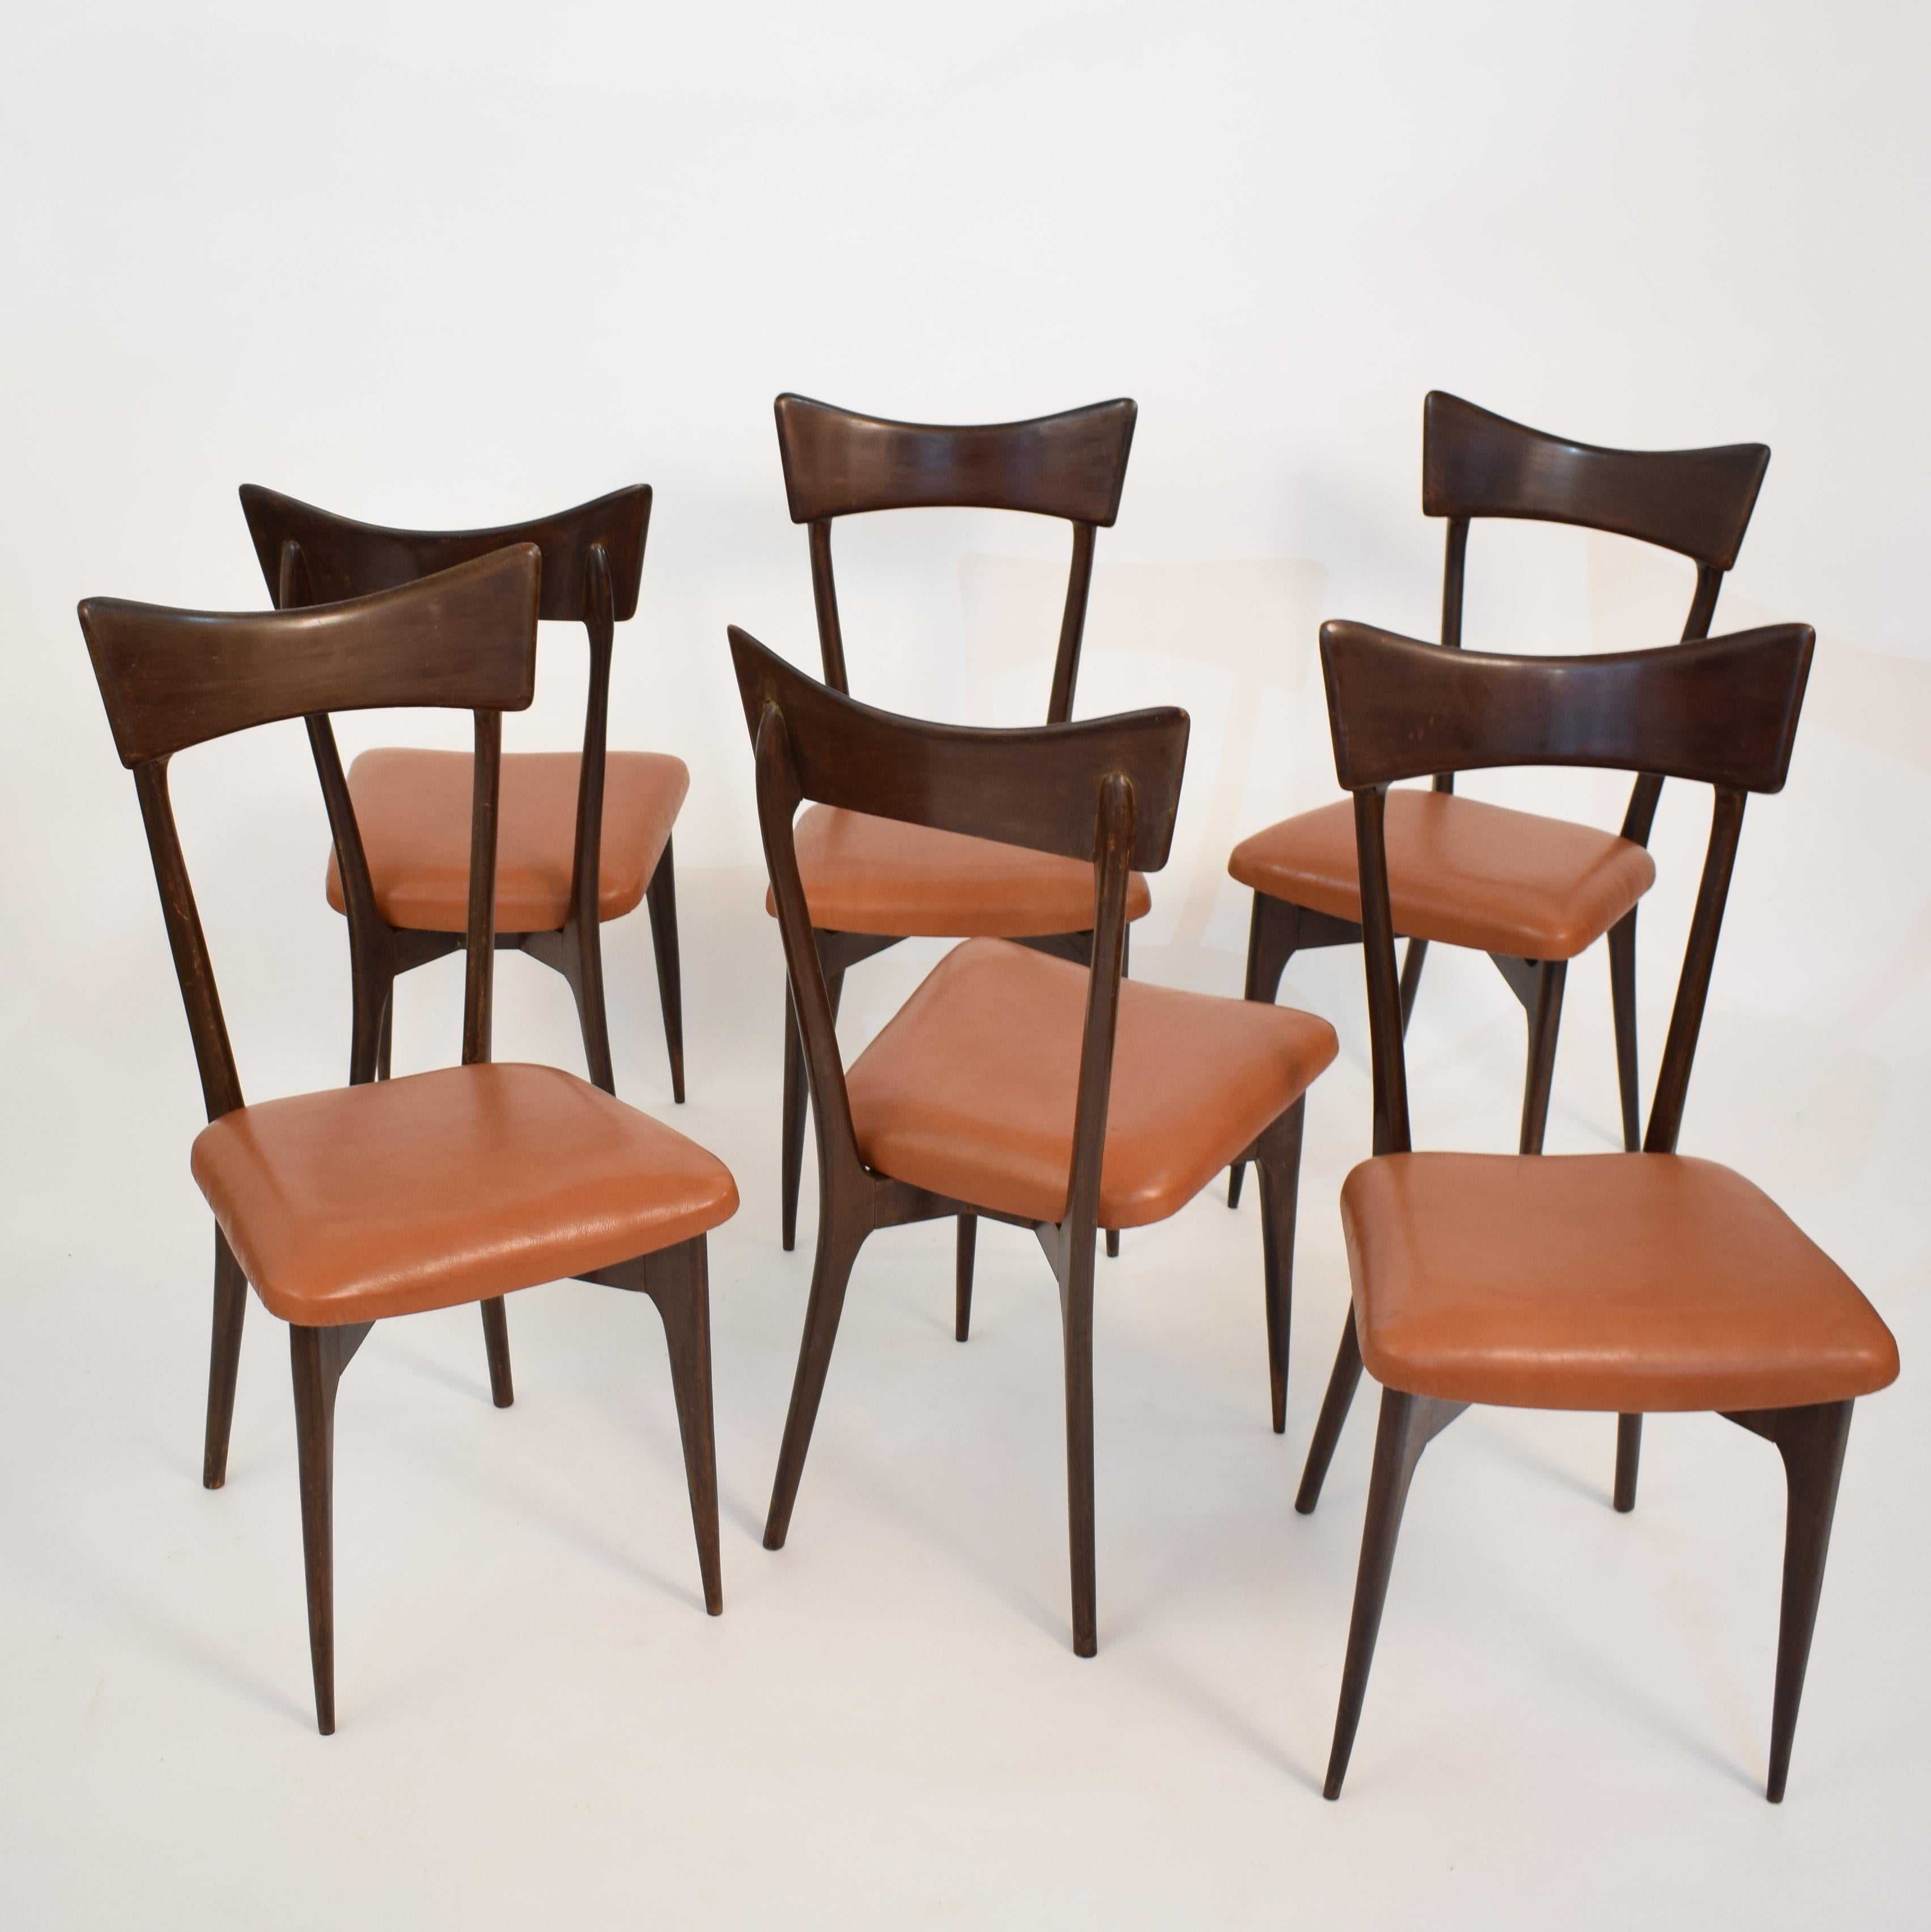 This set of six chairs was designed by Ico Parisi in 1945. It was produced by Colombo Cantu in Italy. 
The chairs are in very good condition and have a great Patina. The seat covers are redone in a cognac leather.